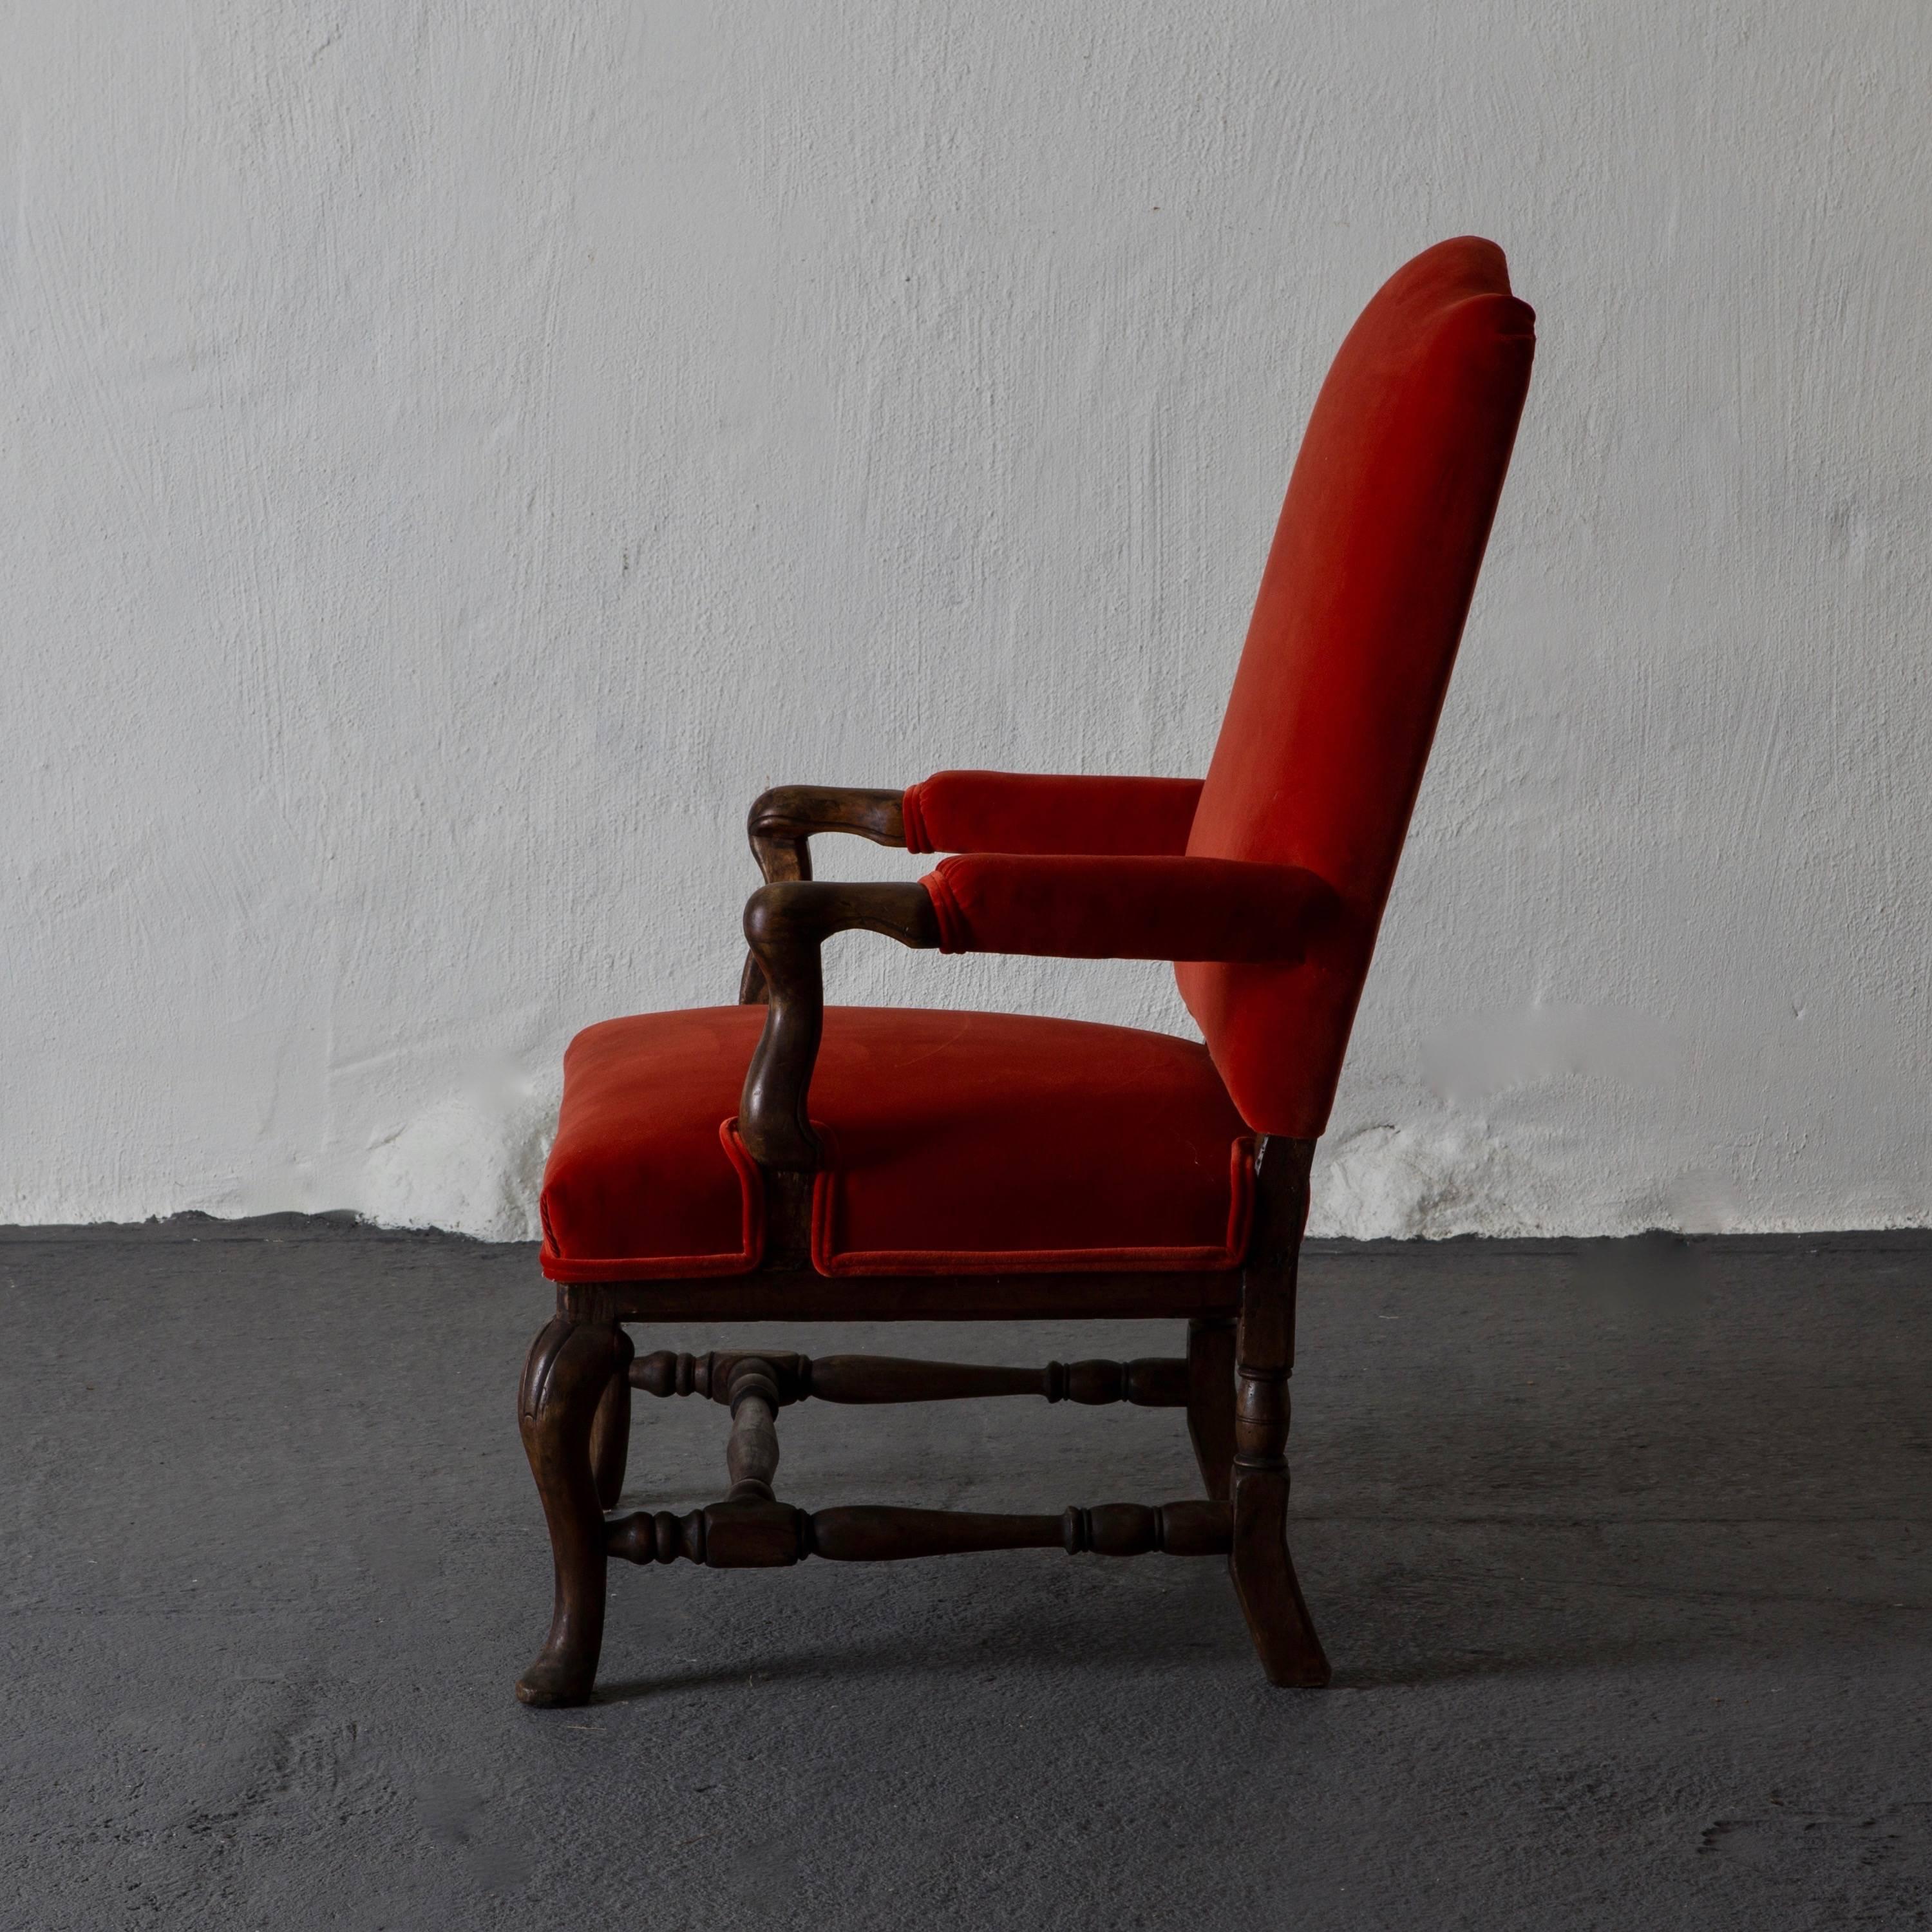 Armchair Swedish Baroque 18th century red Sweden. An armchair made during the 18th century in Sweden. Upholstered in a red cotton velvet. Double piping.